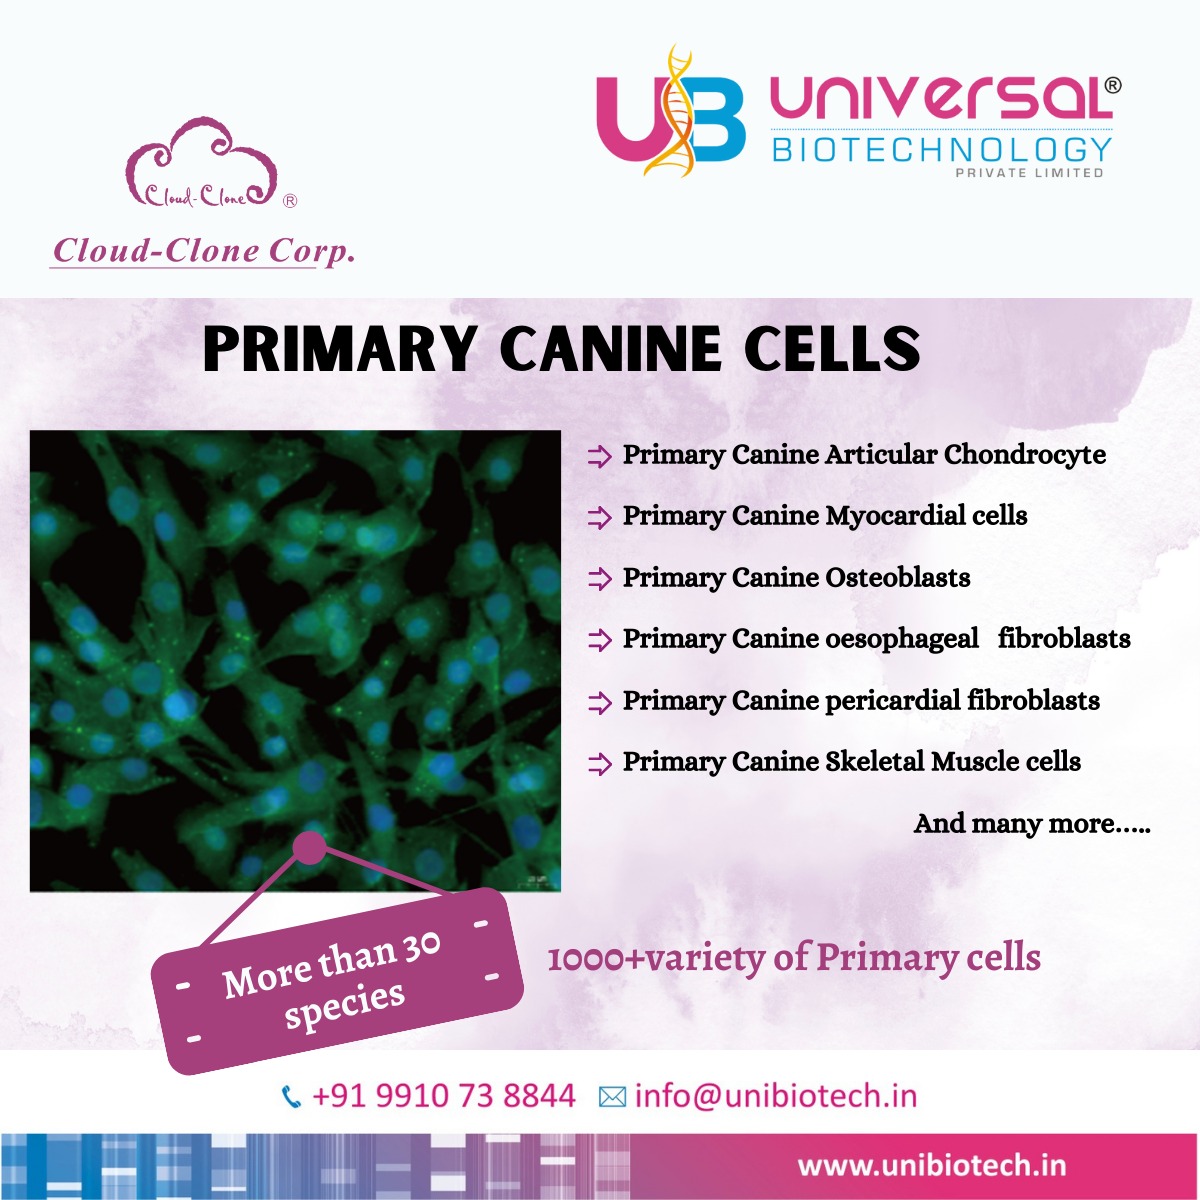 Universal Biotechnology Pvt. Ltd. is introducing Primary cells from 

#unibiotech #cloudclone #research #science #biotechnology #cellculture #canine #primarycells #3Dculture #free #onestopinfinitychoices